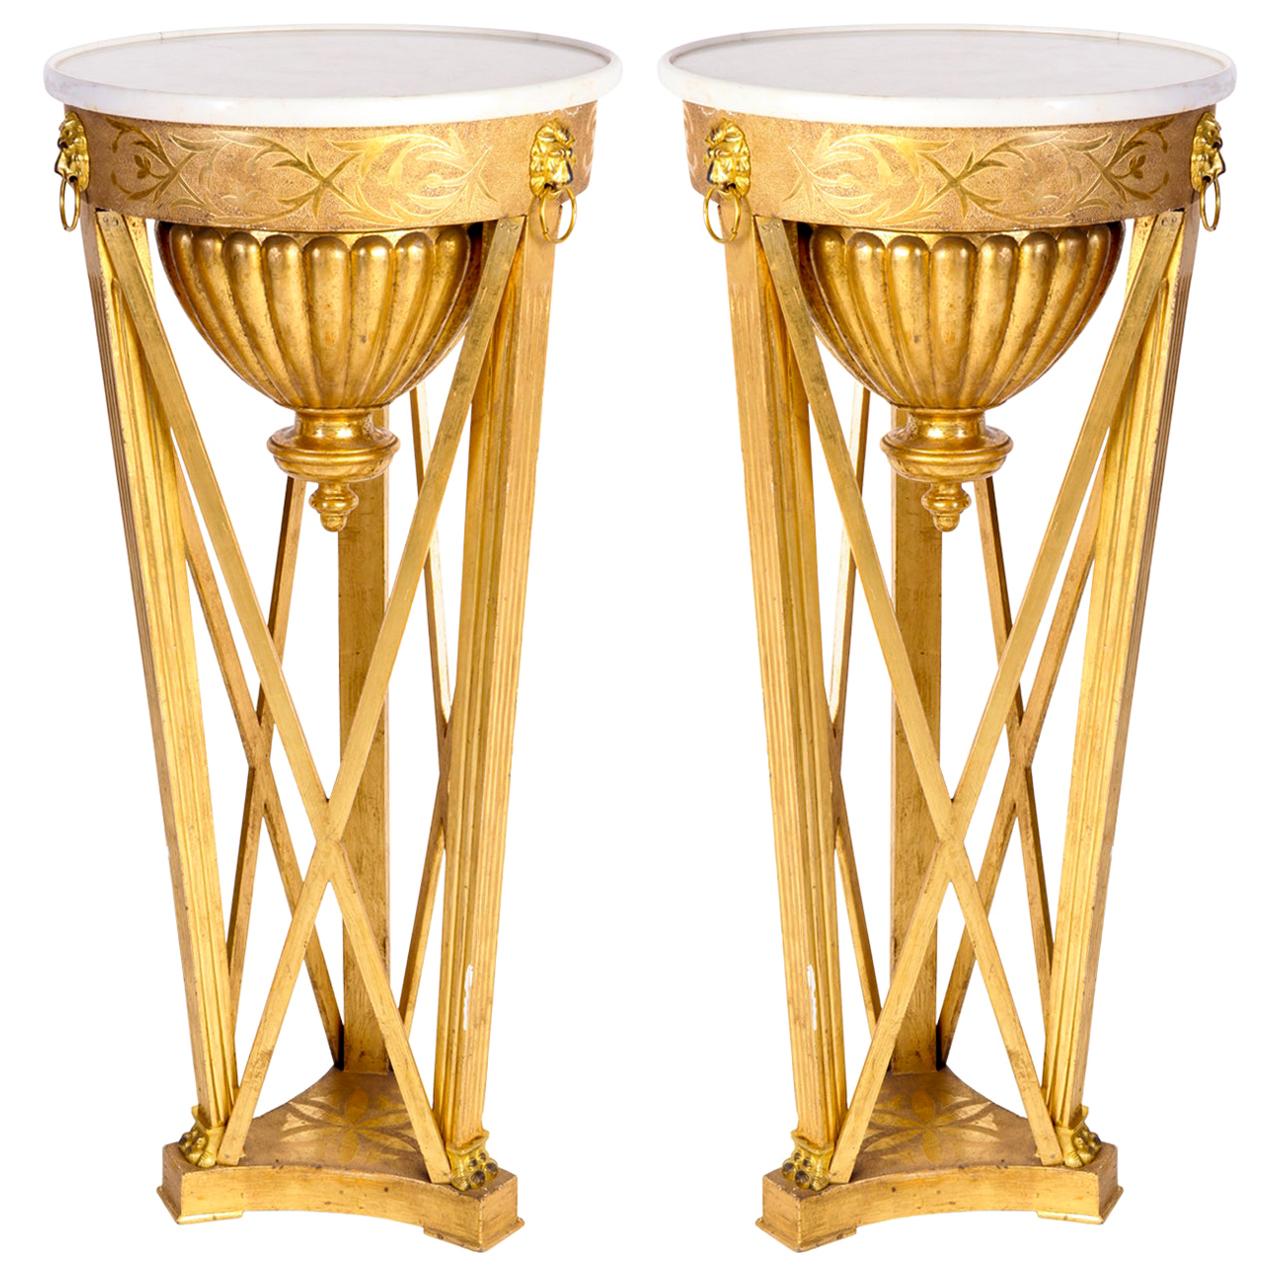 Very Fine Pair of Italian Neoclassical Guéridons or Side Tables Tuscany, 1830